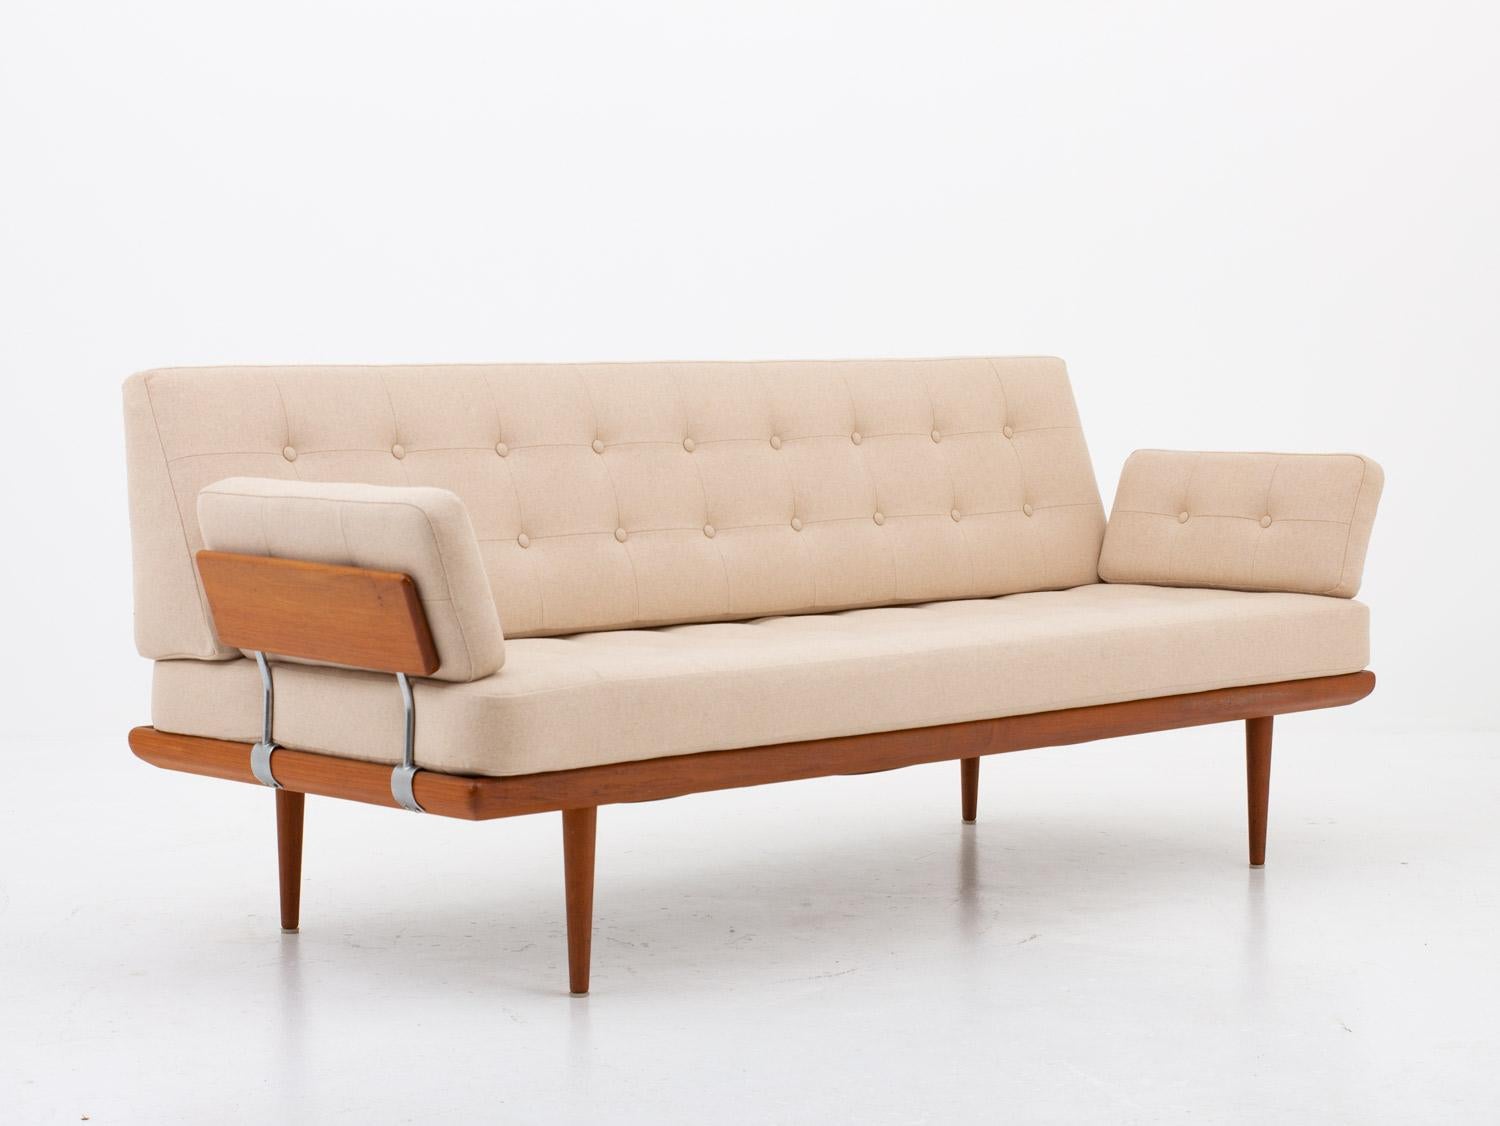 Stunning three-seat sofa or daybed model 